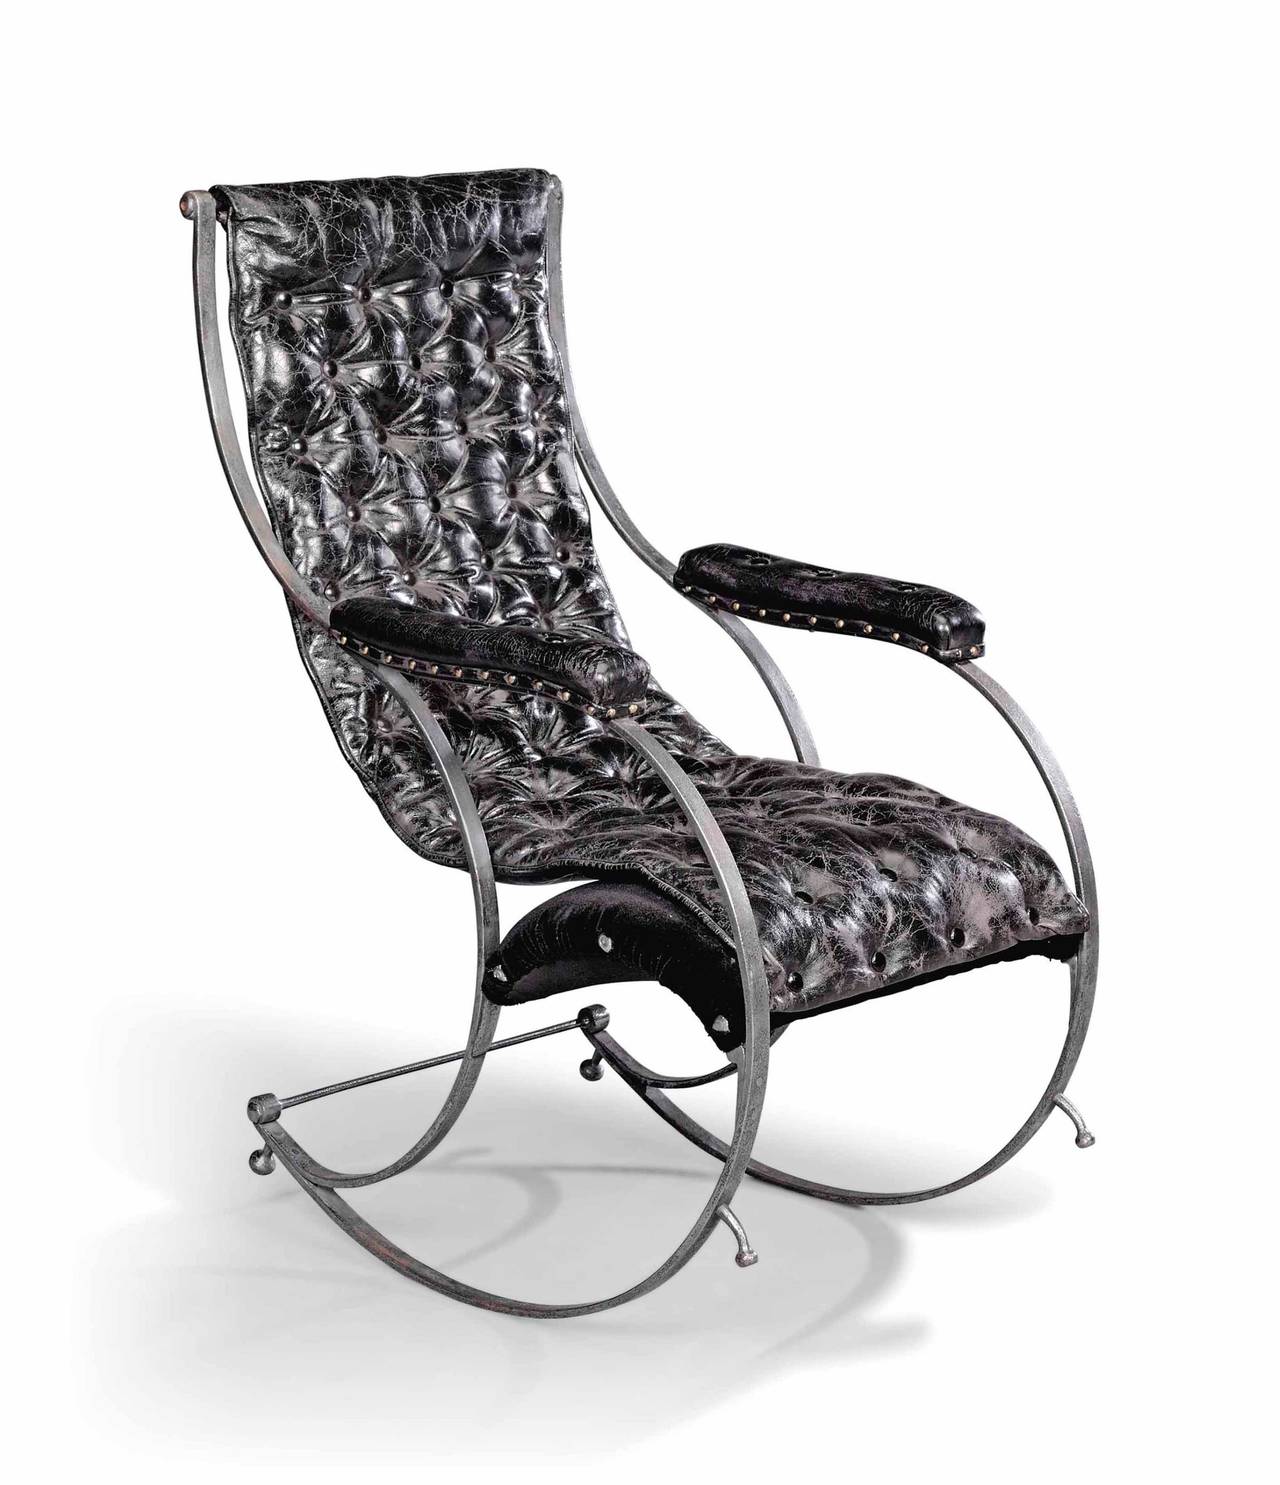 A strip metal steel frame rocking chair in the manner of R. W Winfield, reupholstered in new black distressed leather.